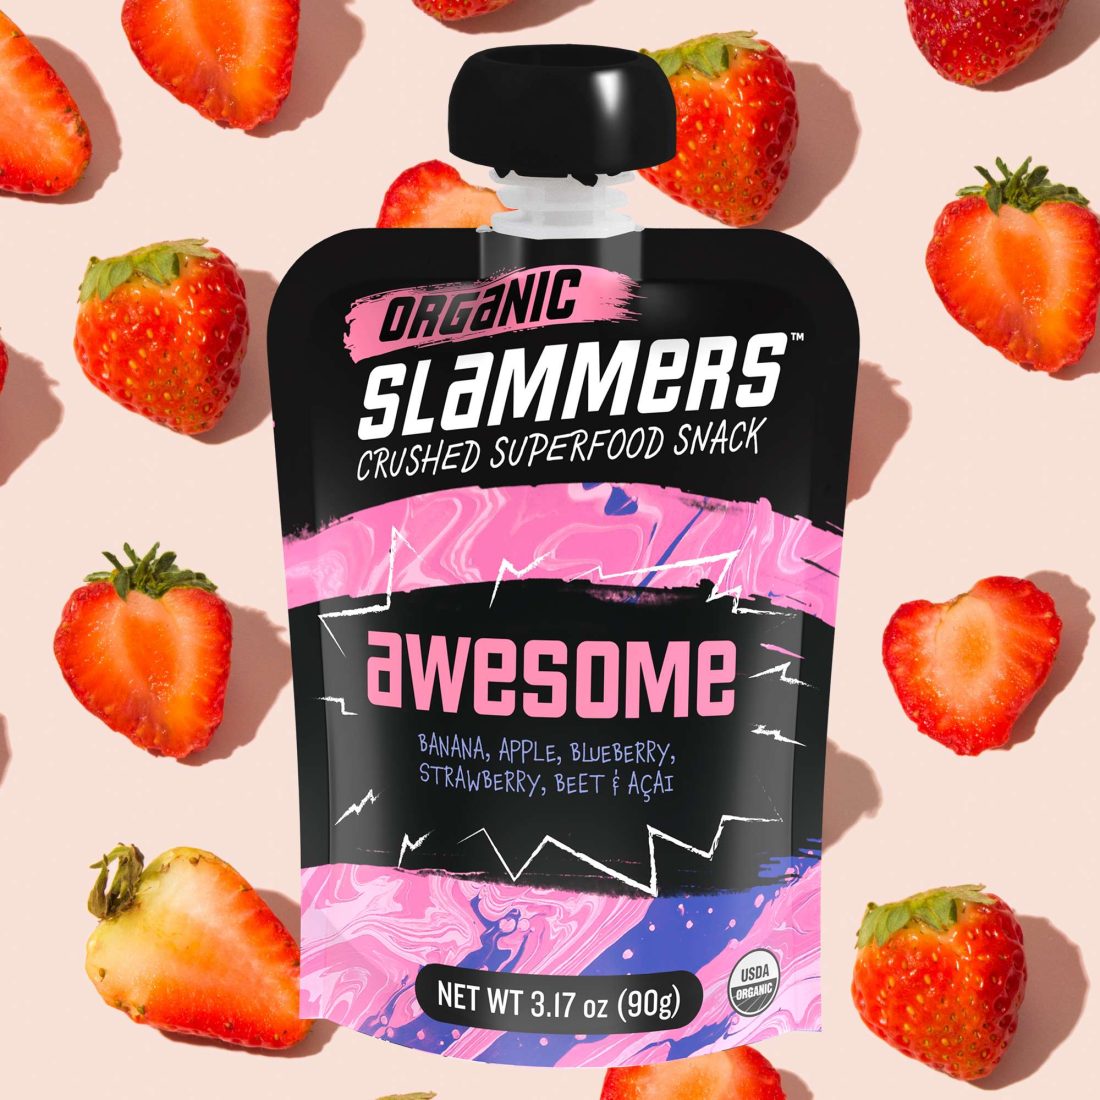 Awesome with strawberry